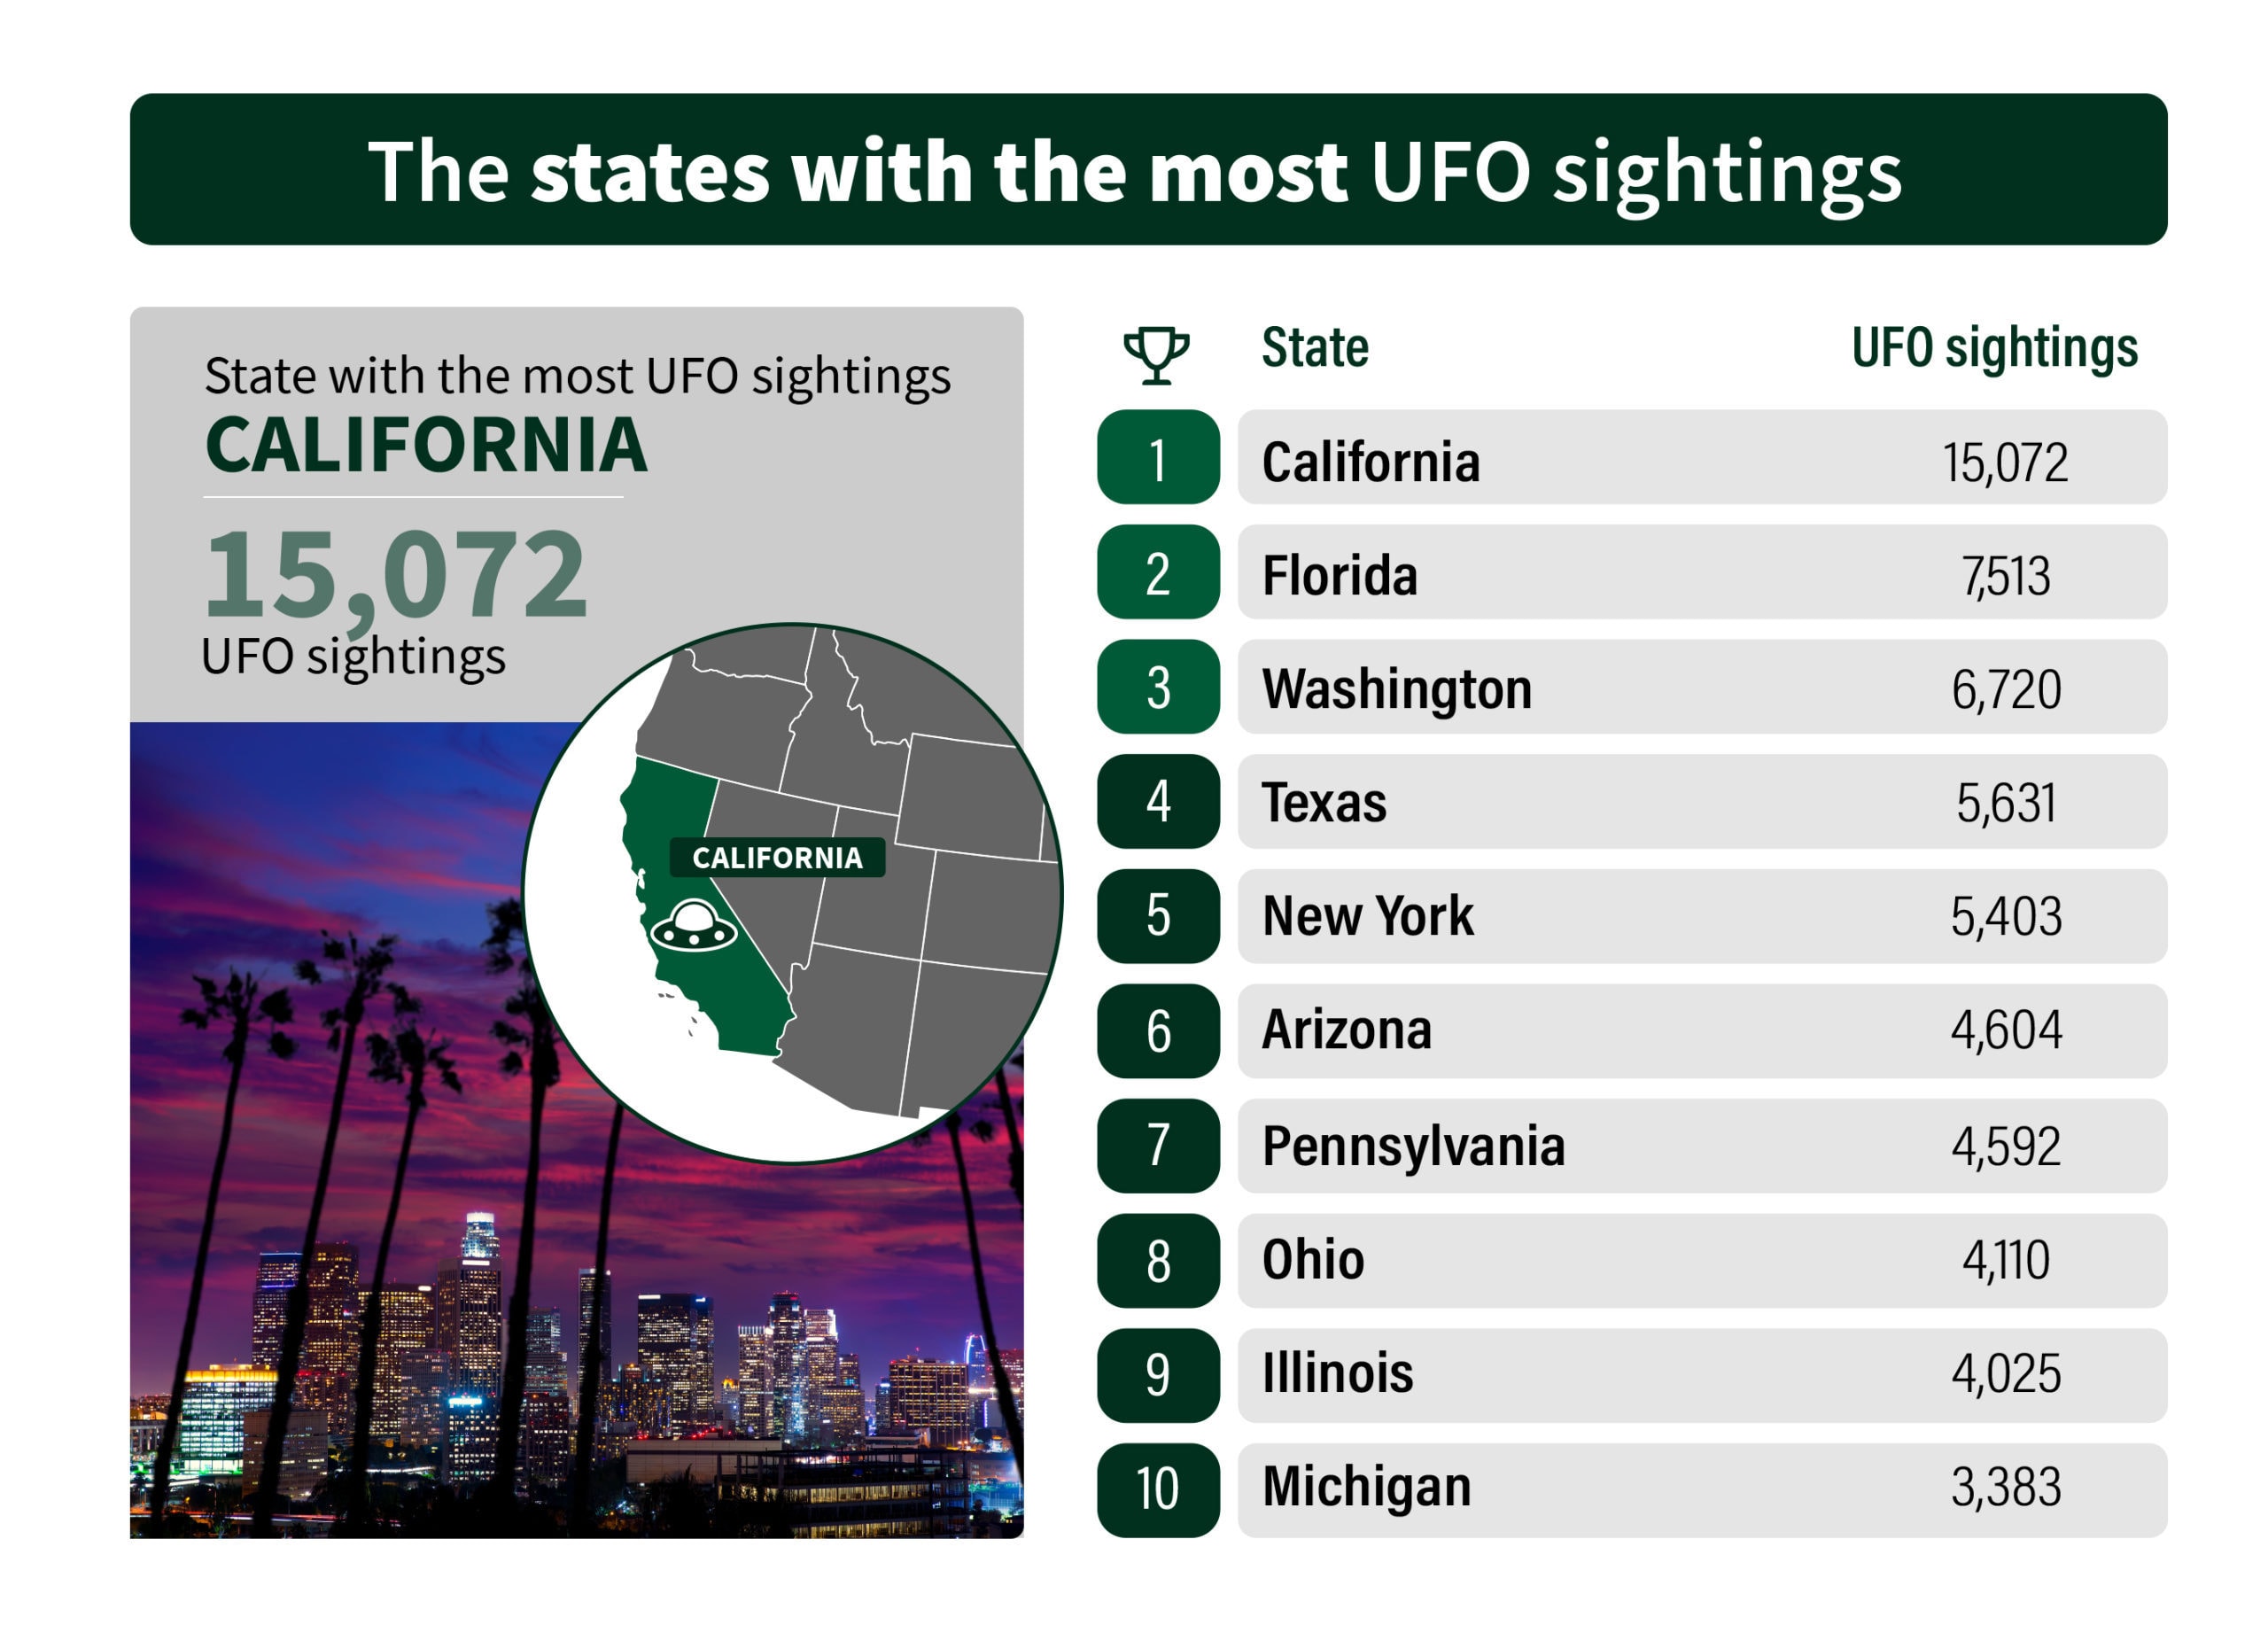 infographic about the states with most UFO sightings or extraterrestrial encounters in the USA